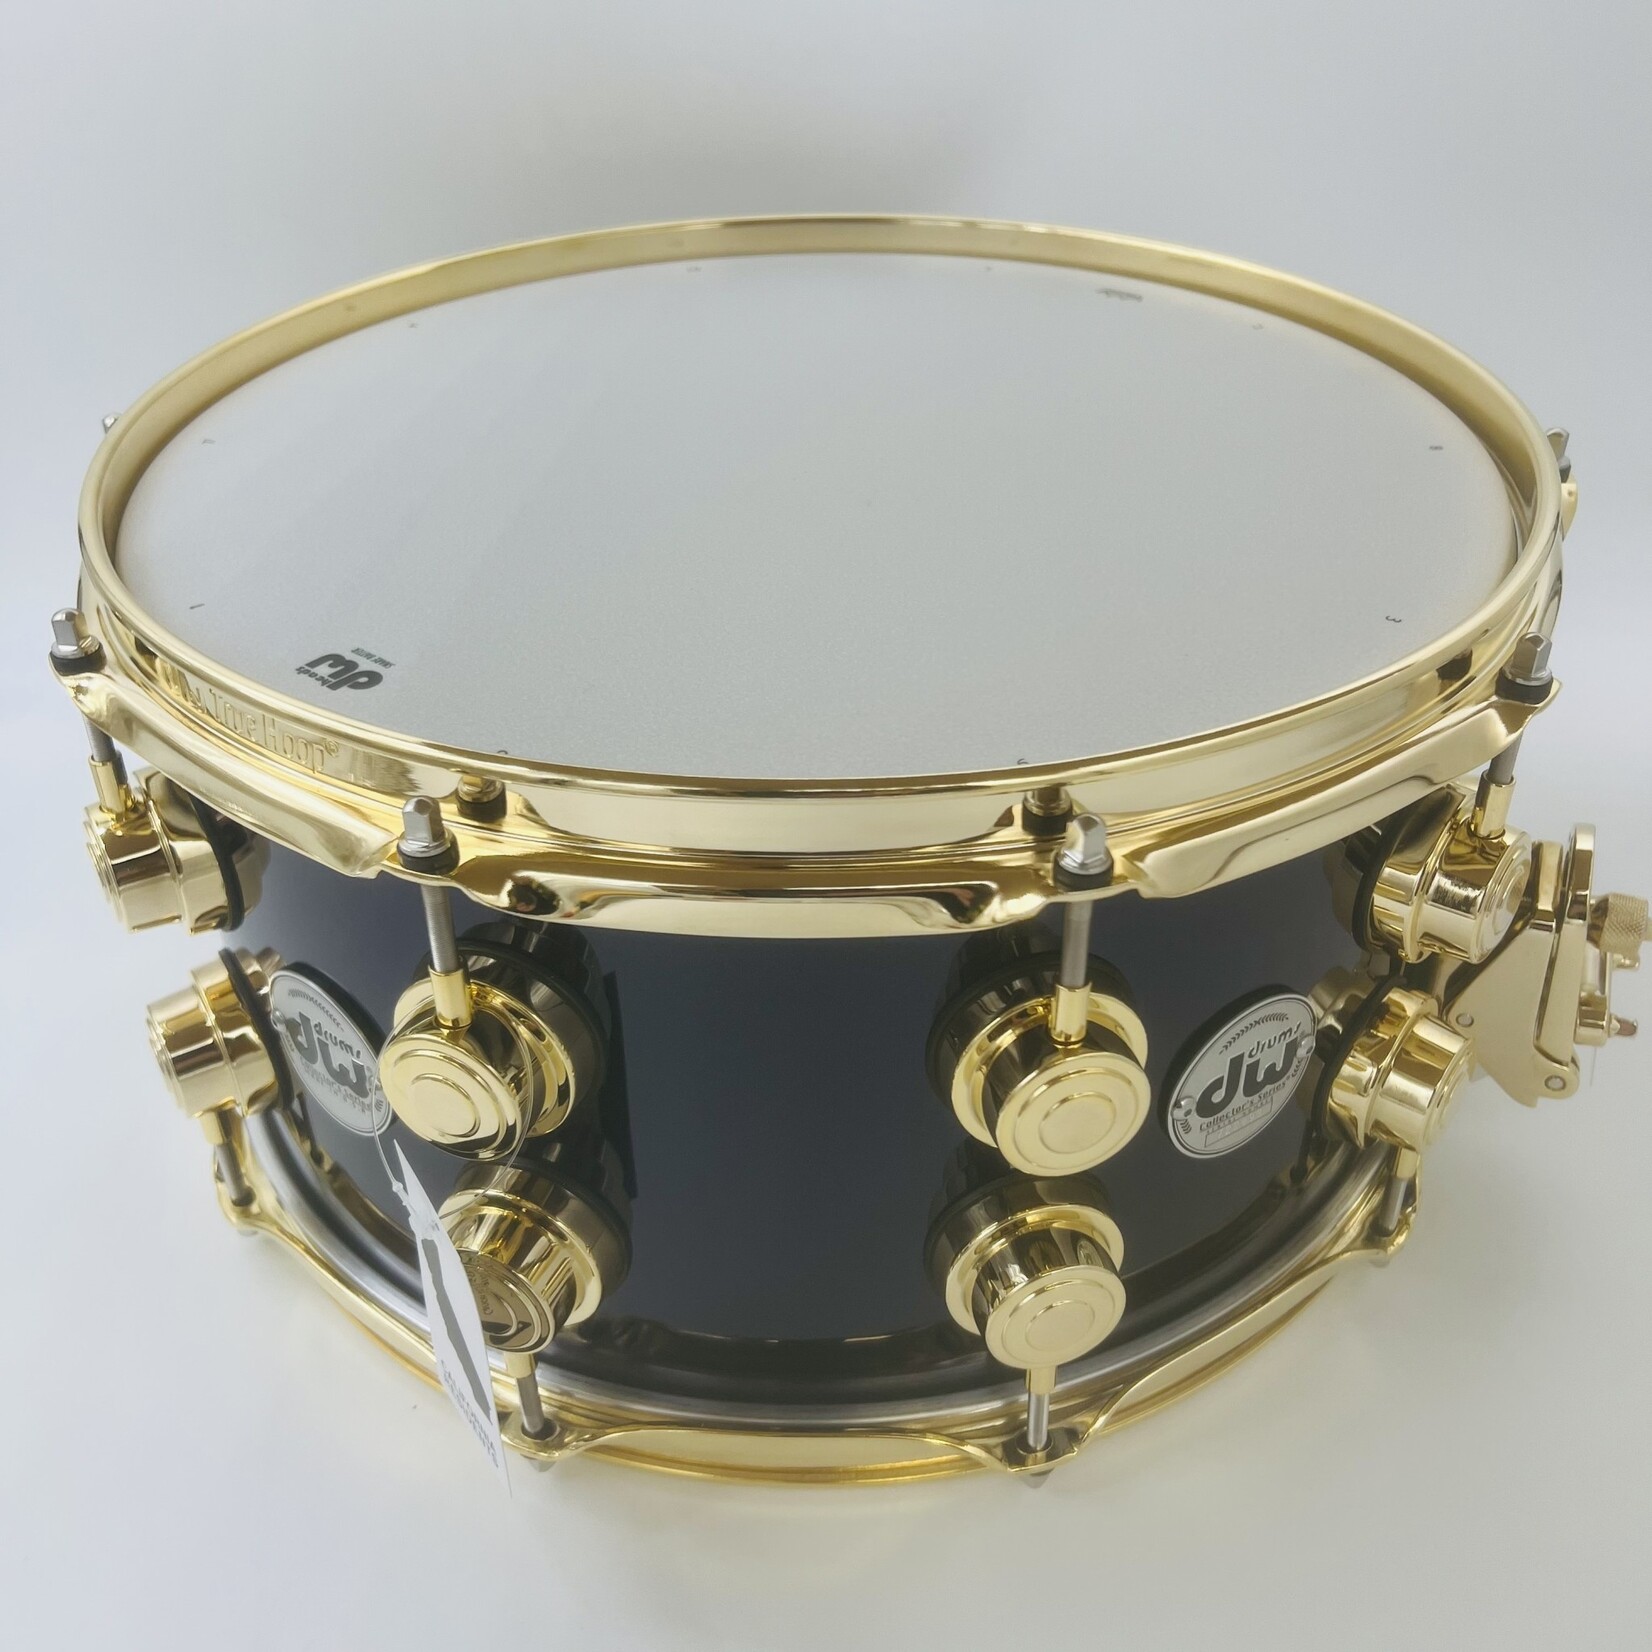 DW DW Collector's Series 7x14" Maple-Mahogany Snare Drum (Solid Black with Purple Pearl Sparkle Lacquer) with Gold Hardware